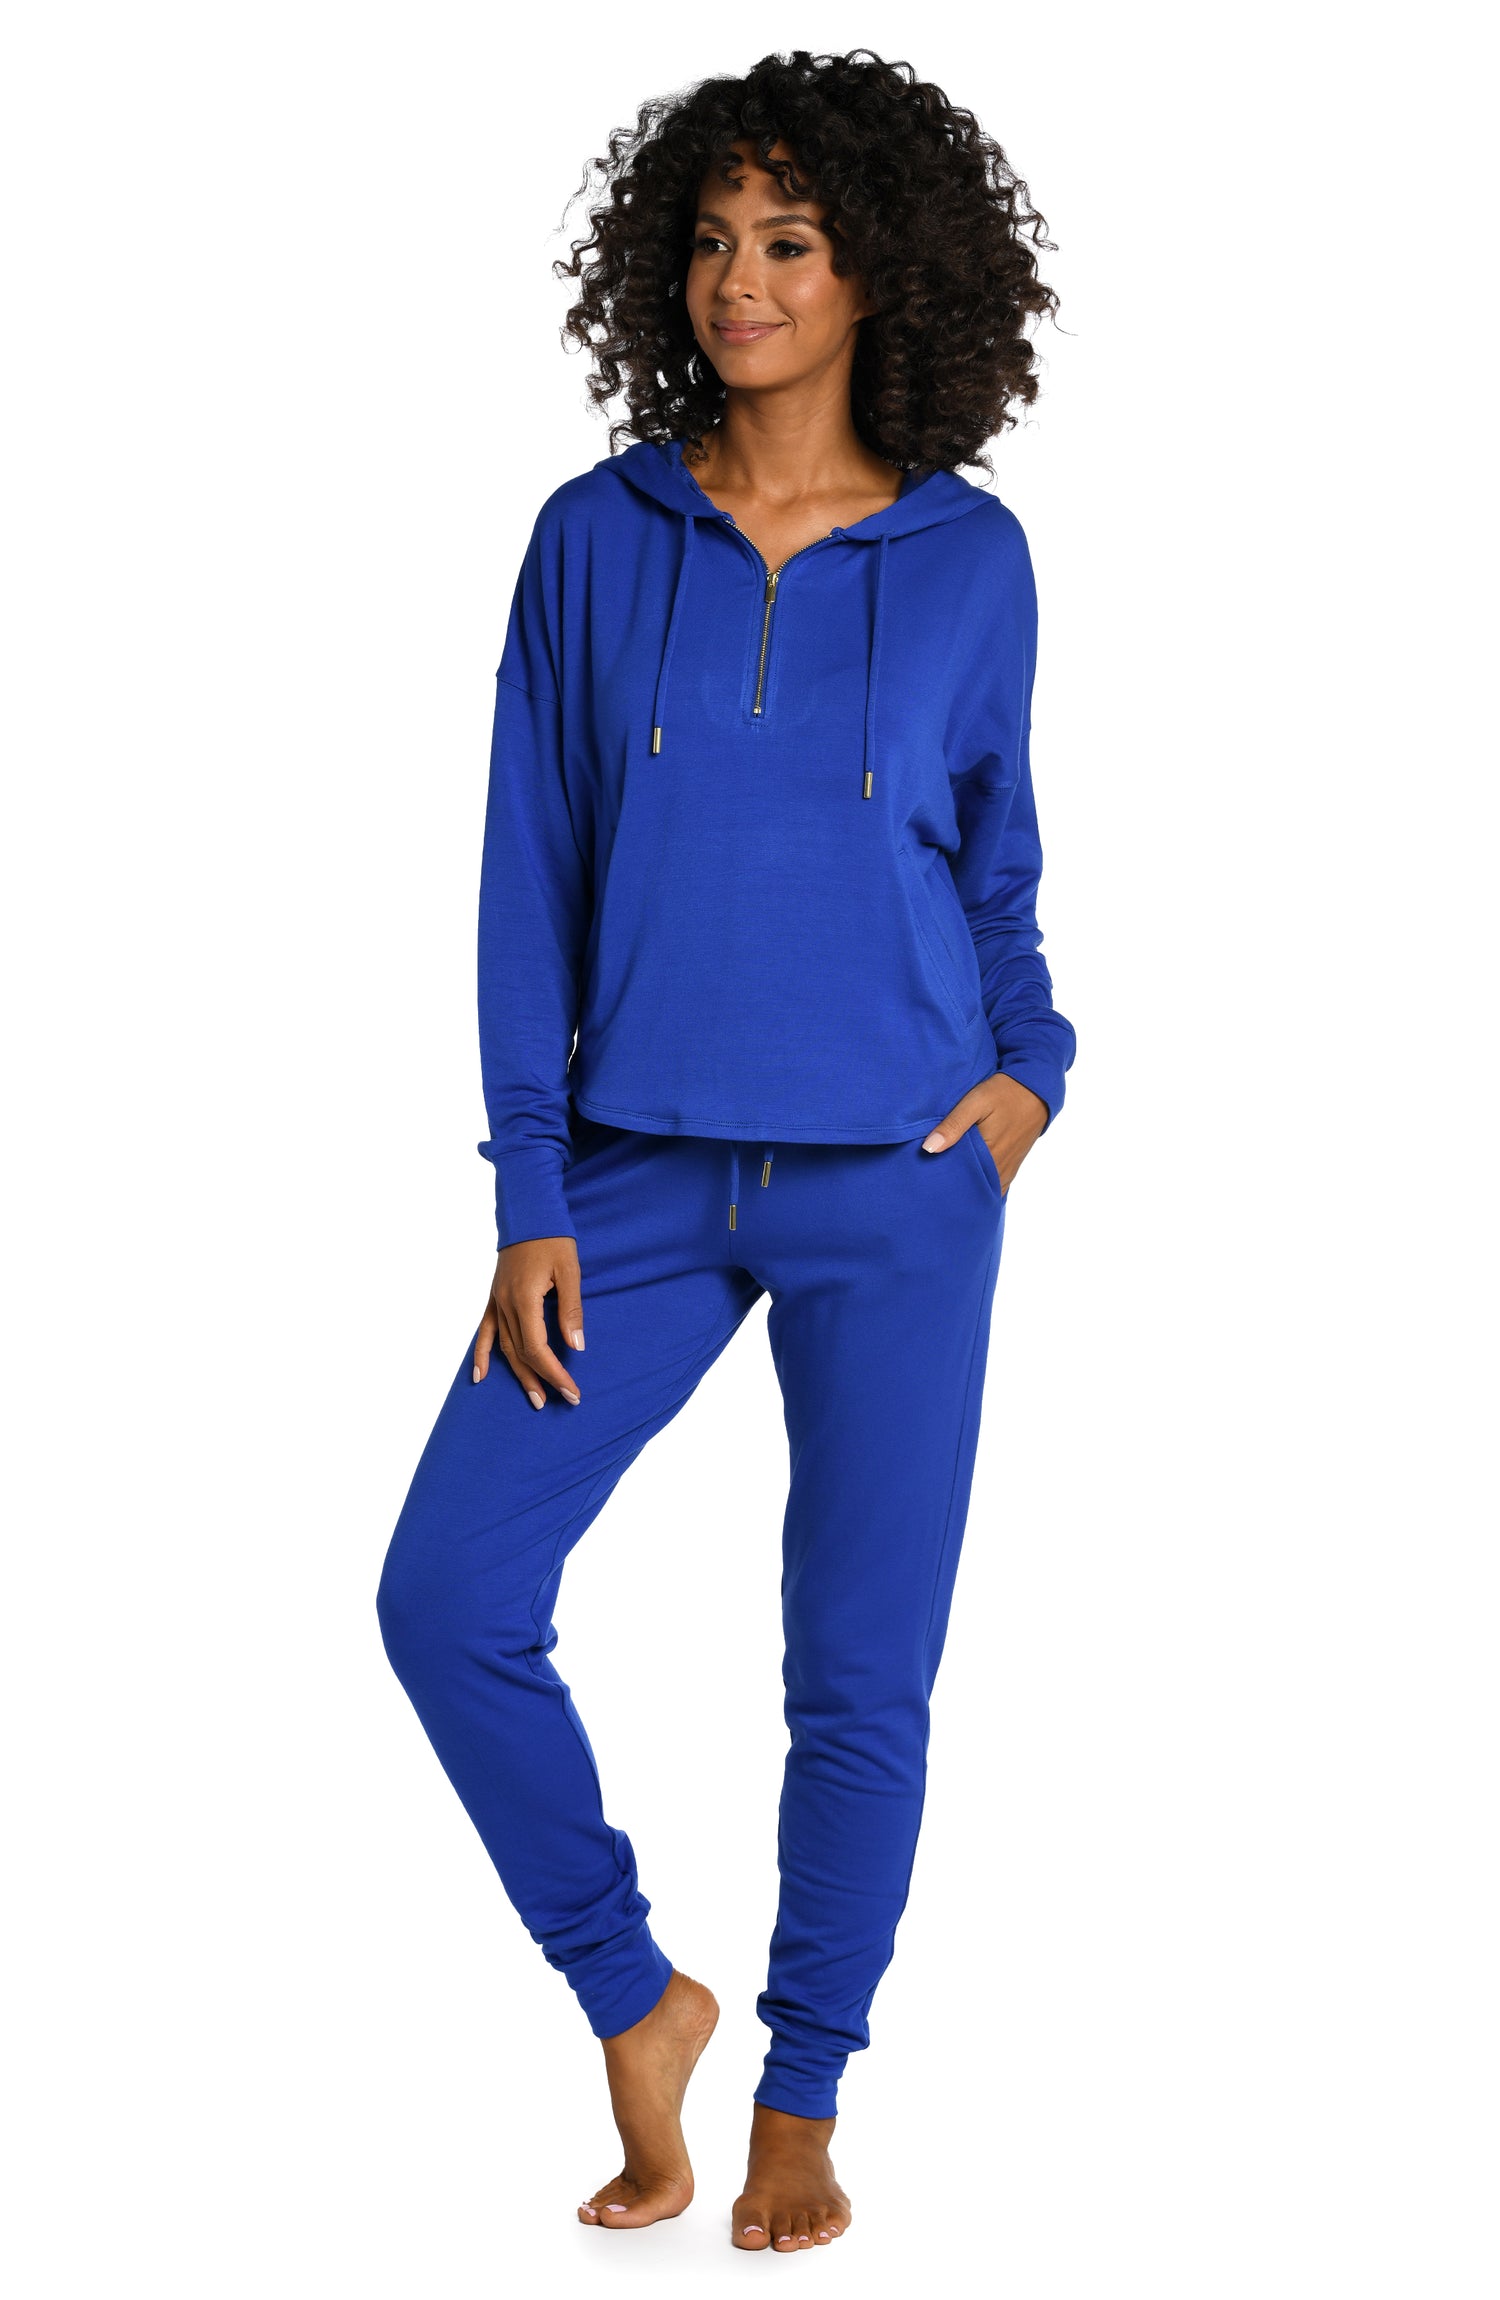 Model is wearing a sapphire colored knitted joggers from our Living in Leisure collection!